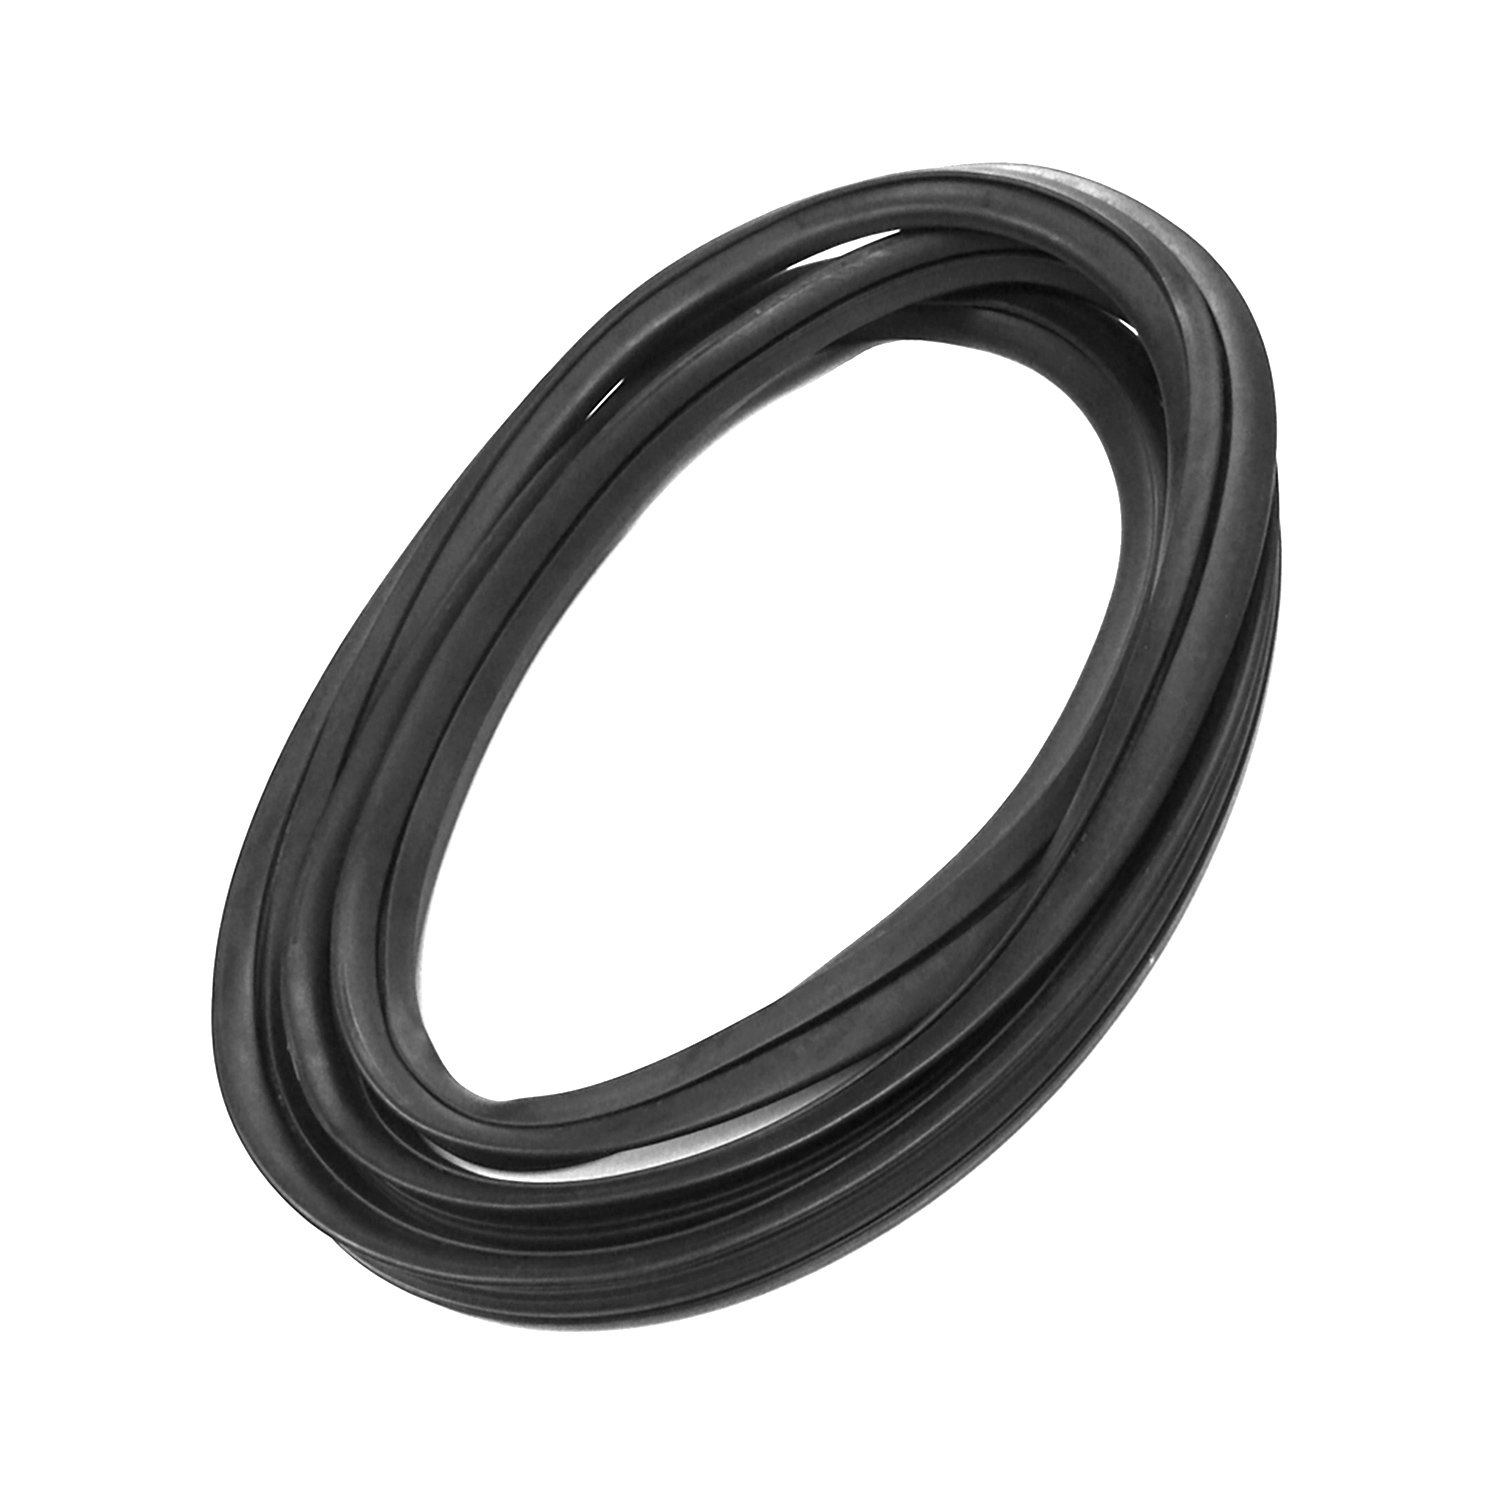 1978 Chevrolet G20 Windshield Seal, 71-80 GM Full Size Van With Trim Groove, Each-VWS 7324-A